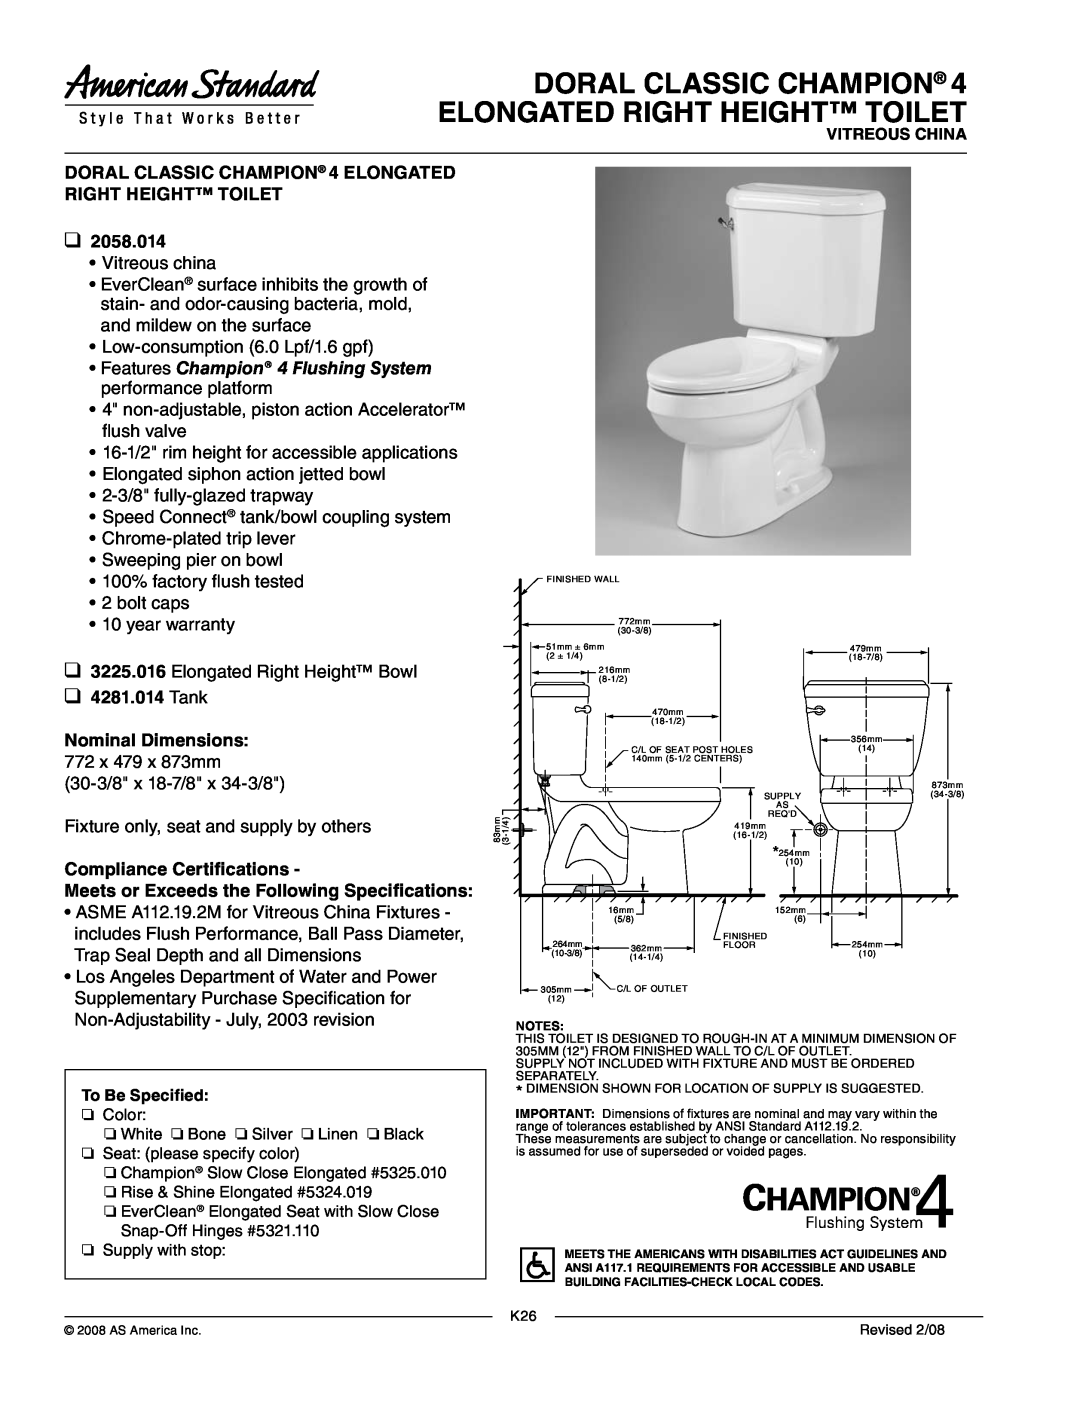 American Standard 2058.014 dimensions Tank Nominal Dimensions, Compliance Certifications 